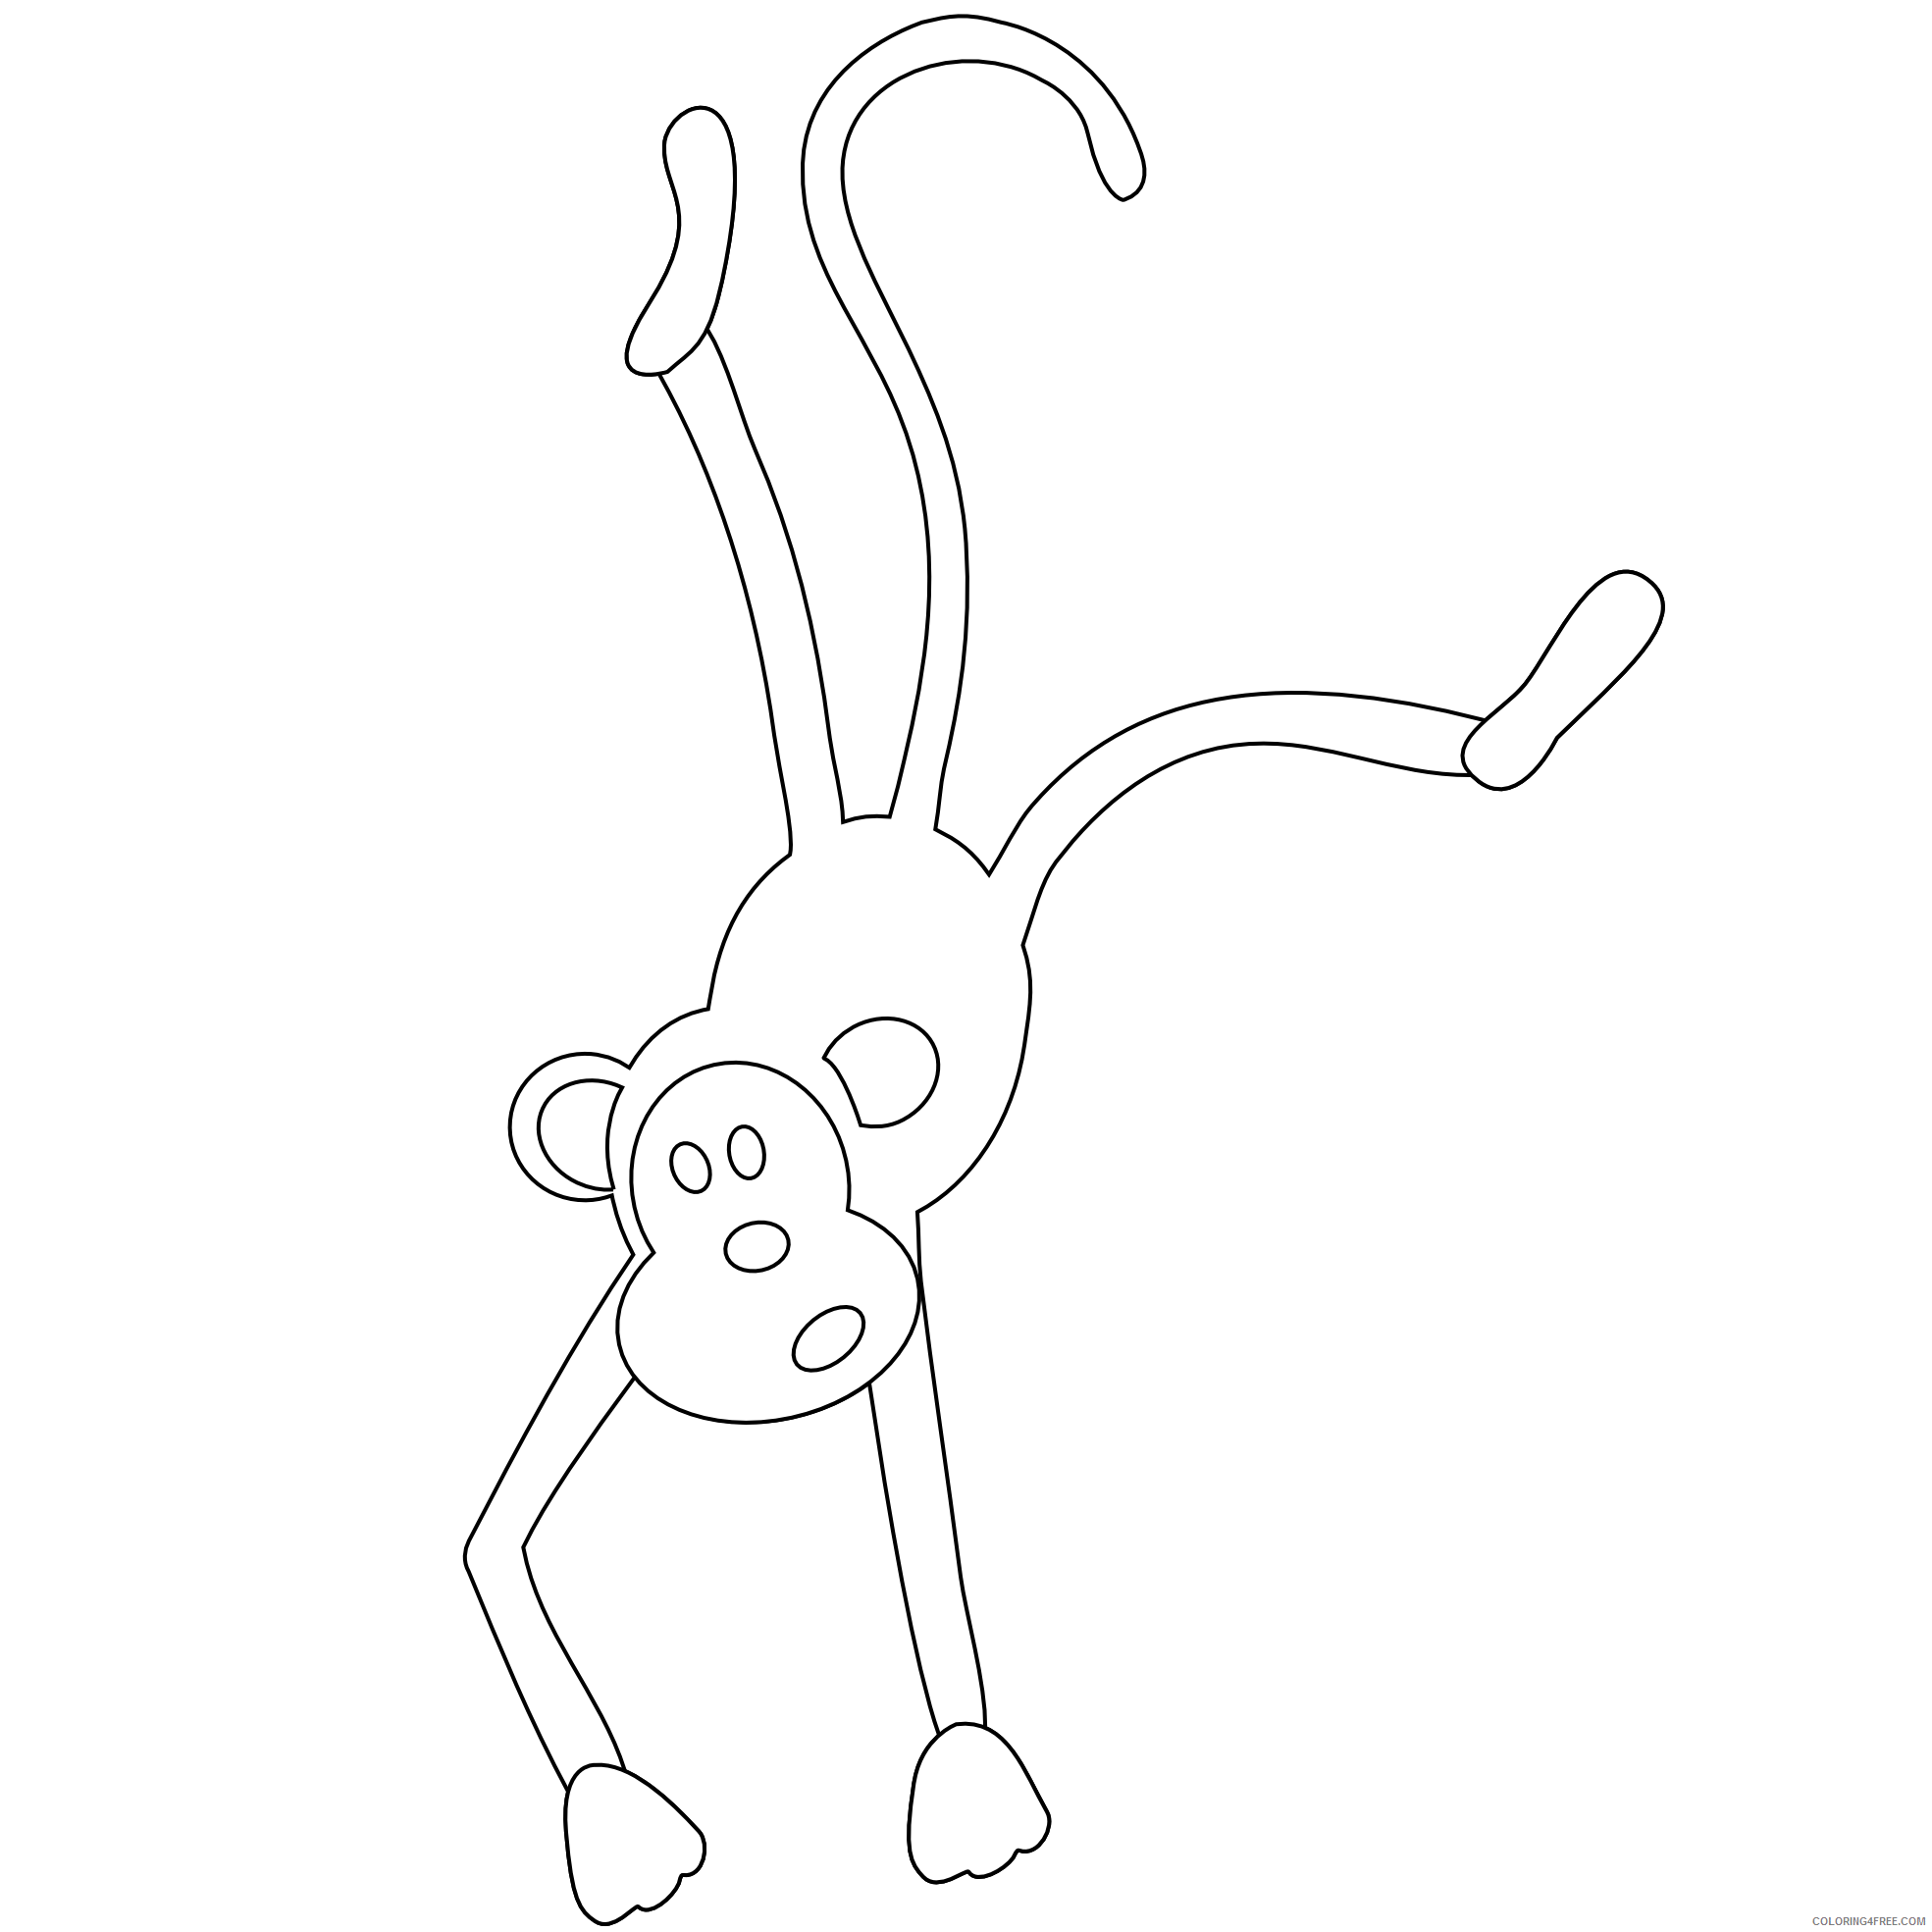 Monkey Outline Coloring Pages monkey Printable Coloring4free